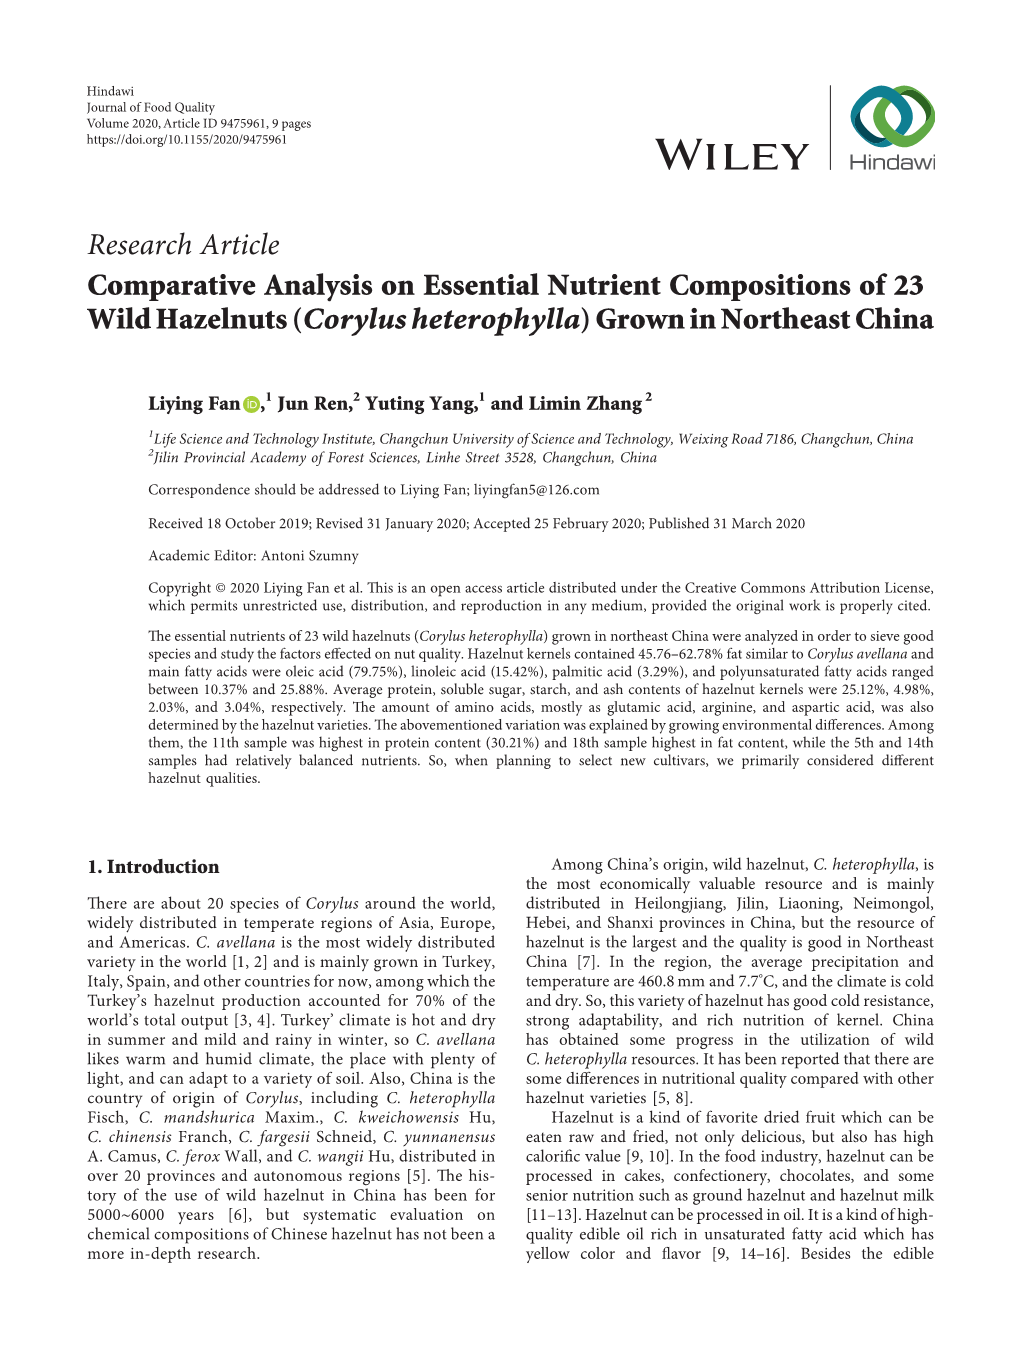 Comparative Analysis on Essential Nutrient Compositions of 23 Wild Hazelnuts (Corylus Heterophylla) Grown in Northeast China